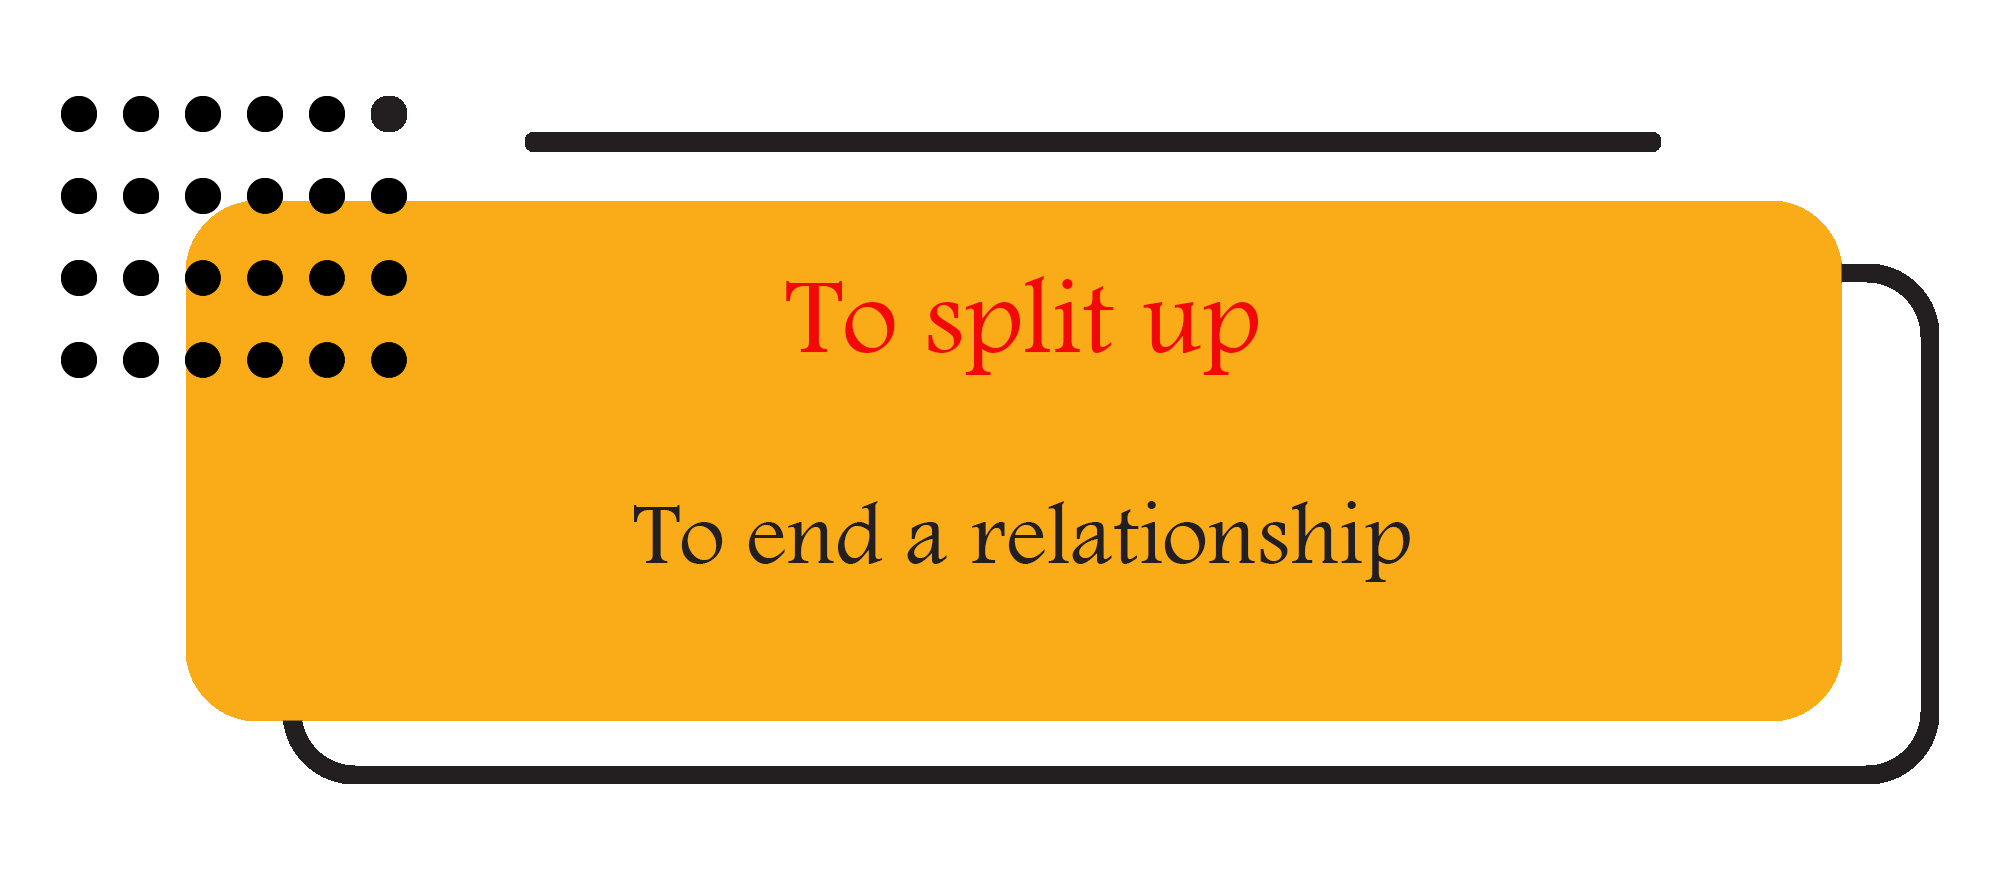 to split up (To end a relationship)